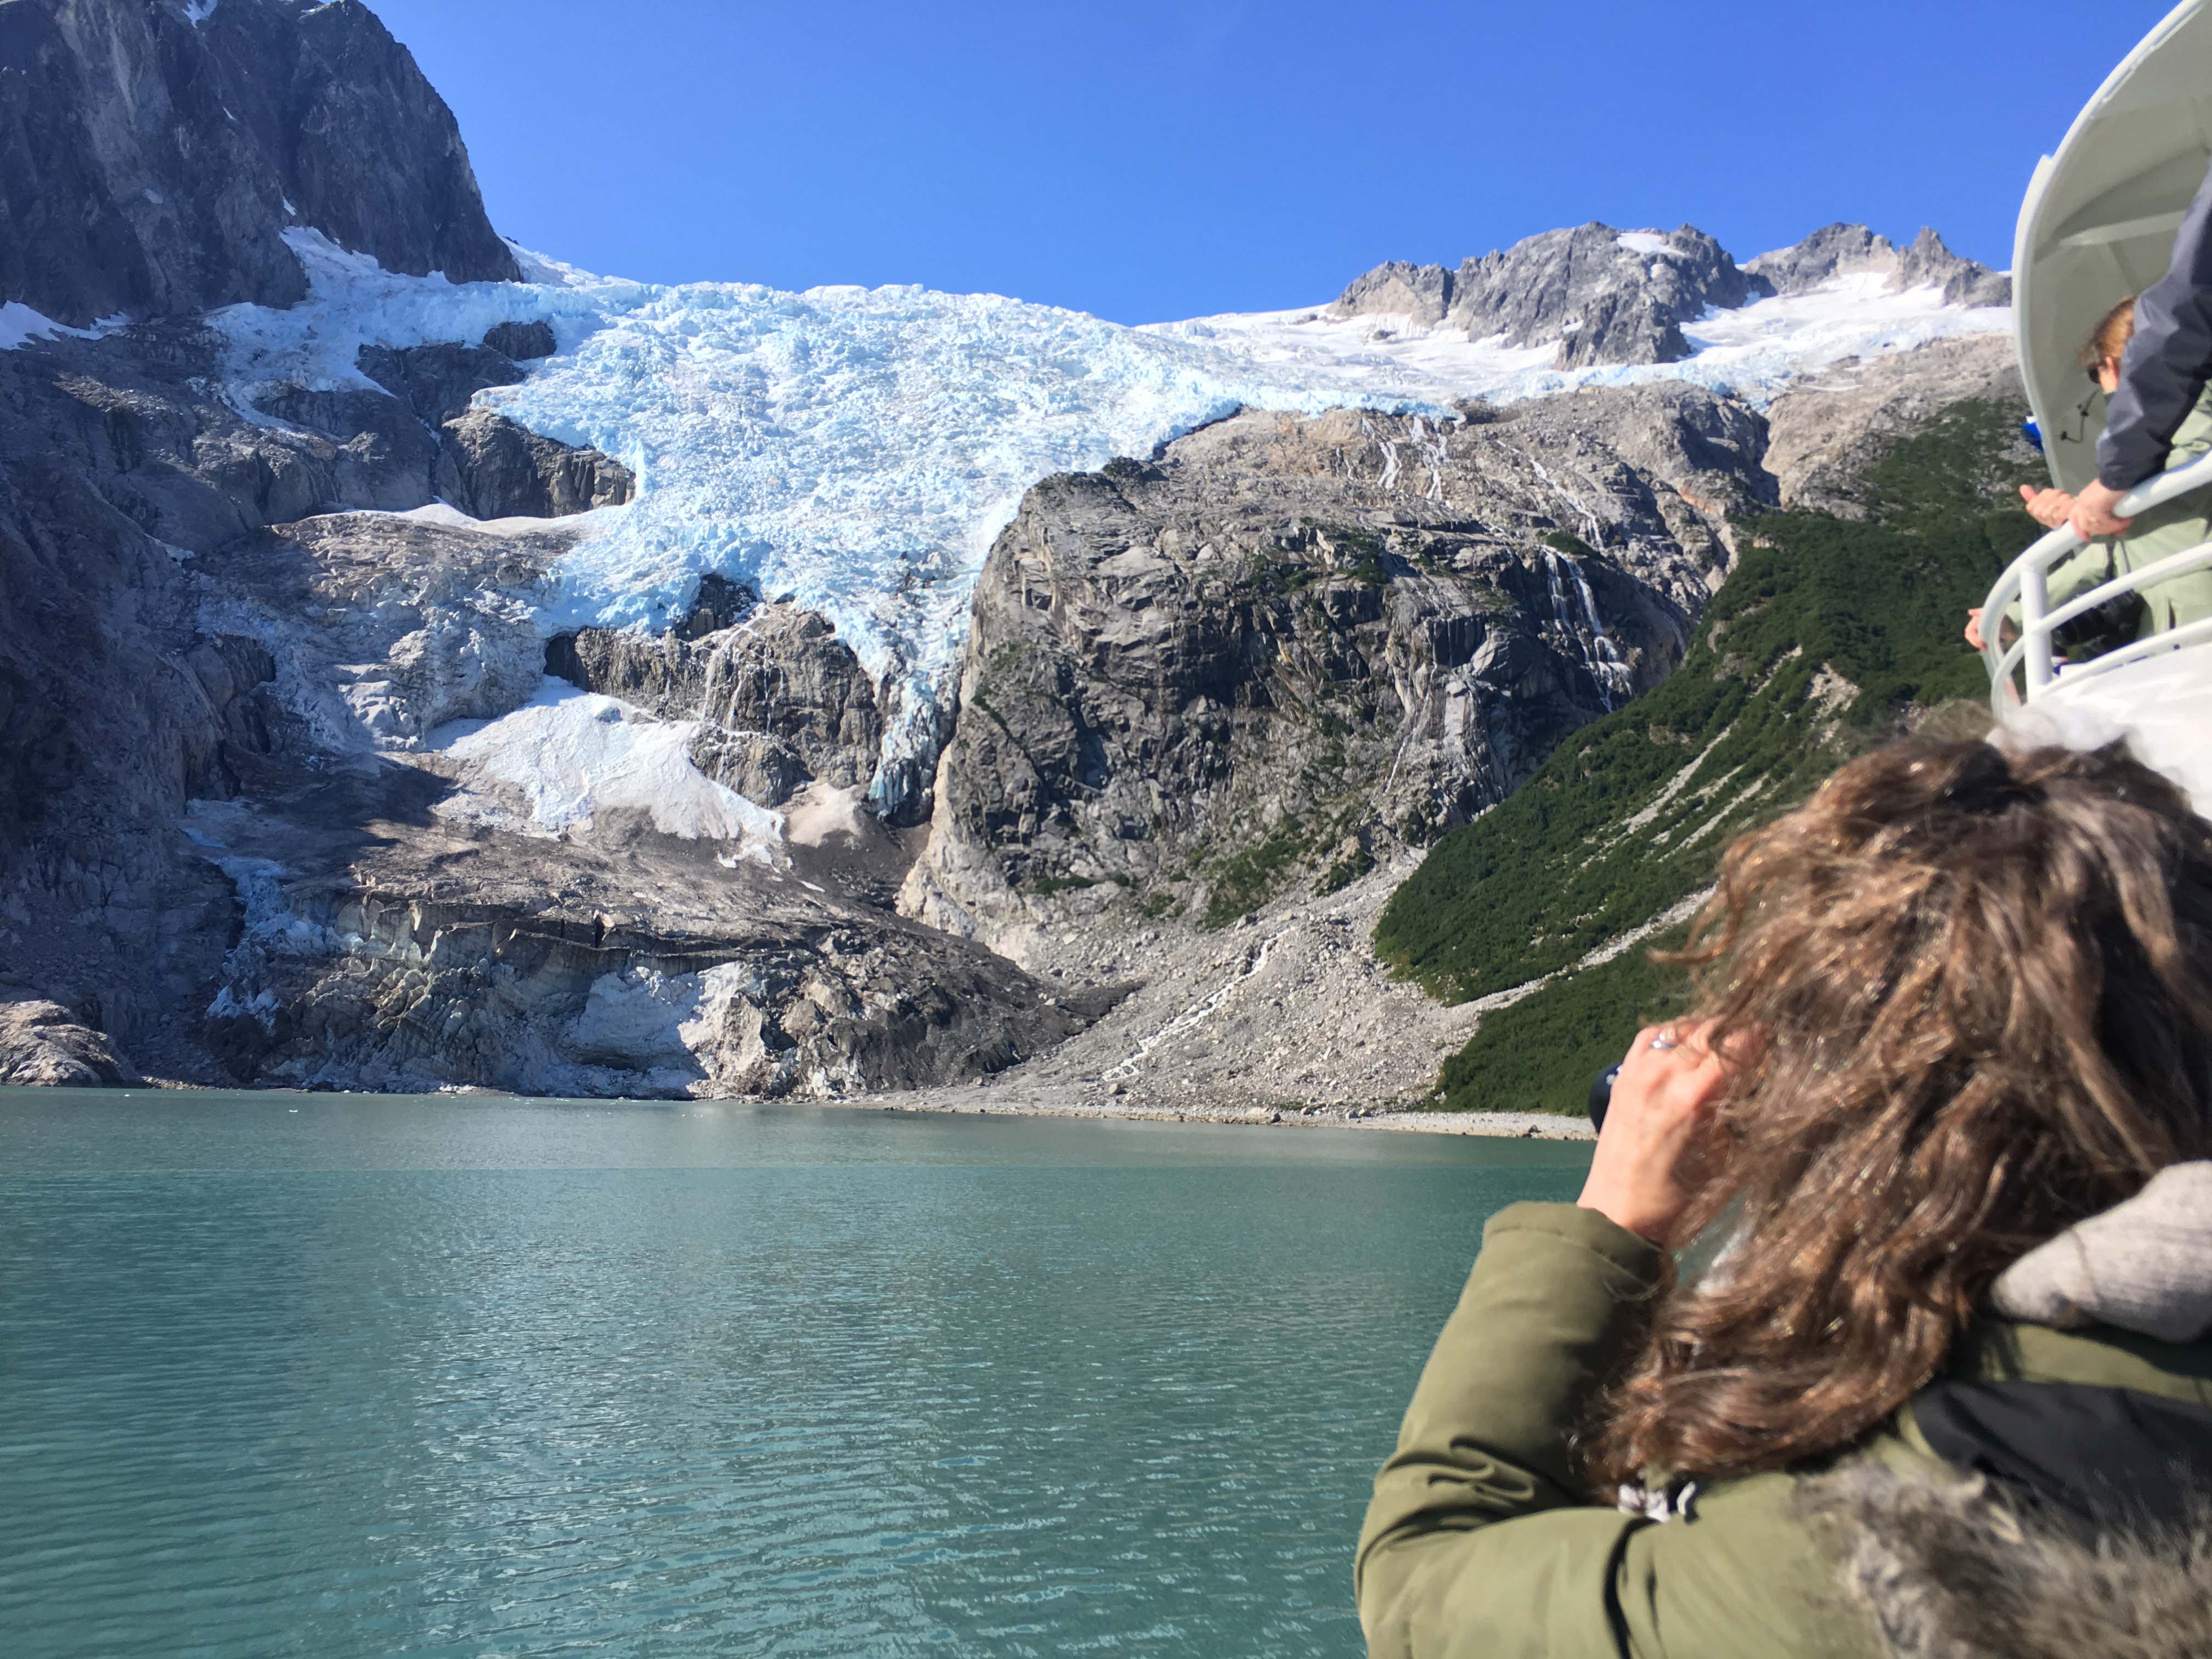 A student looks through binoculars at a looming blue glacier